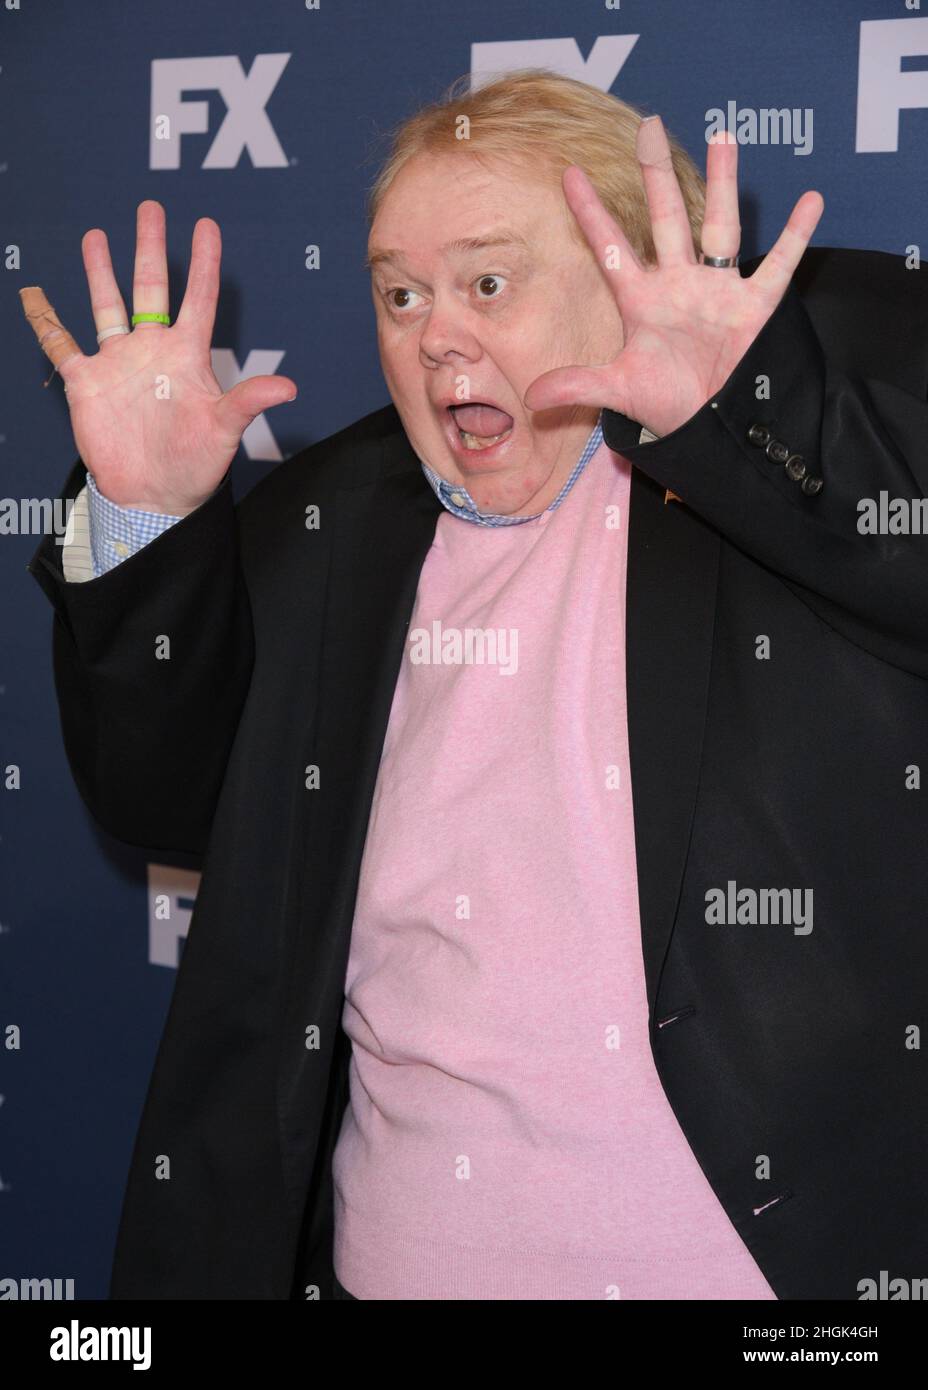 Stand-up comedian, actor Louie Anderson of Baskets attends FX Networks Upfront Screening Of 'The People v. O.J. Simpson: American Crime Story' at AMC Stock Photo